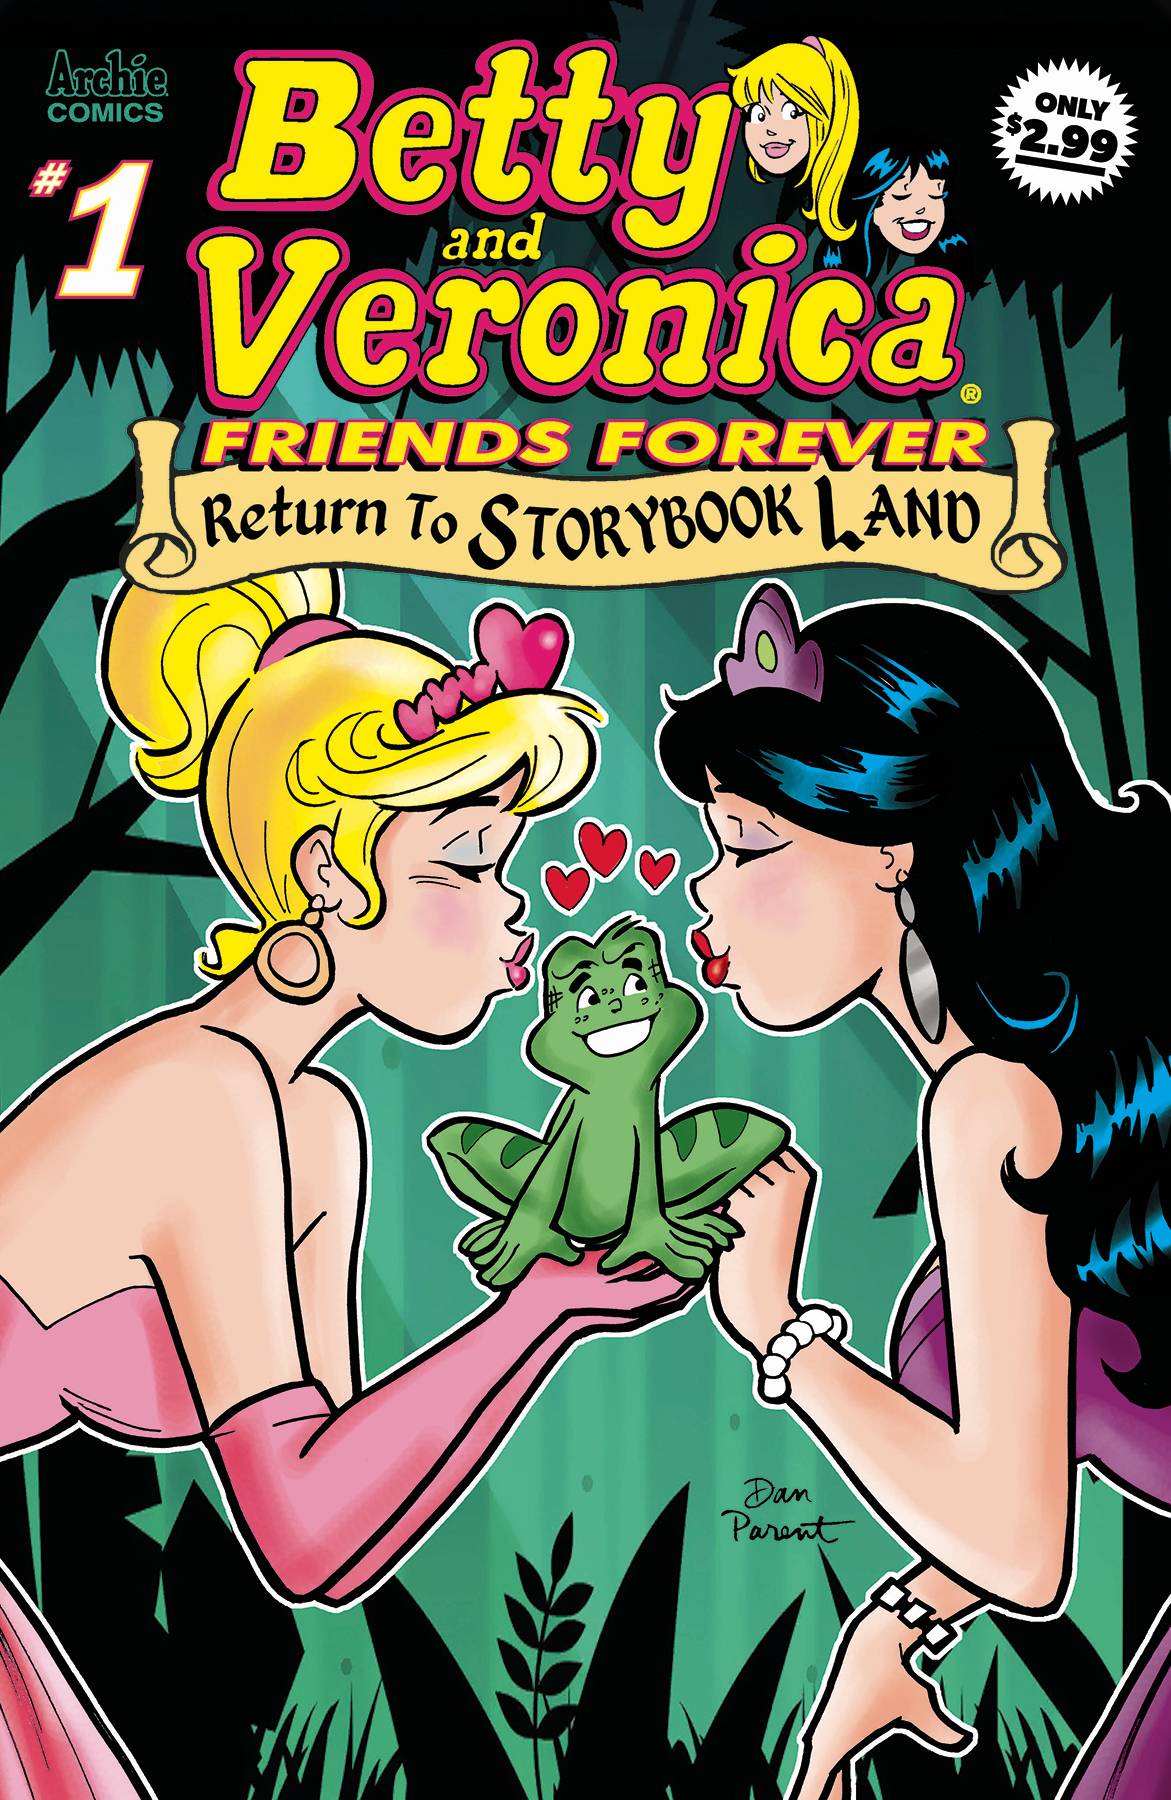 BETTY & VERONICA FRIENDS FOREVER BACK TO STORYBOOK LAND #1